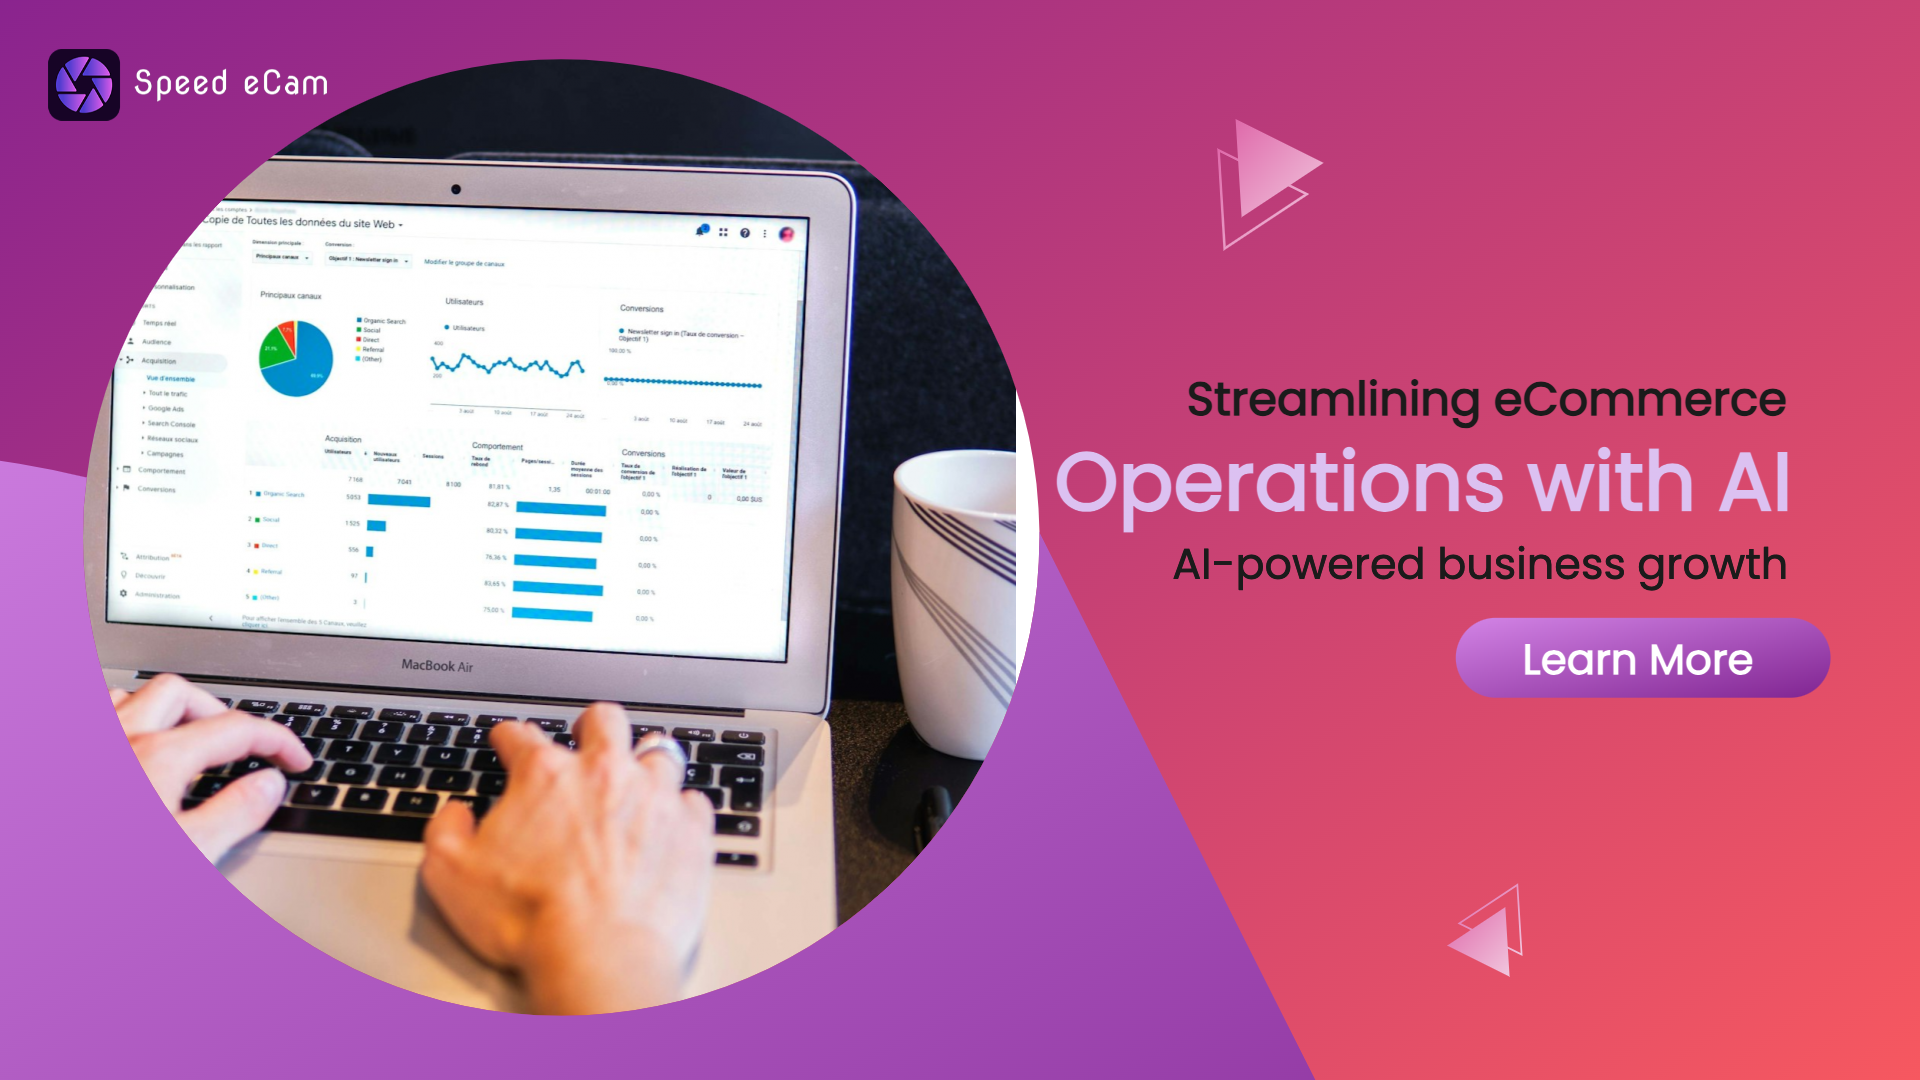 Streamlining eCommerce Operations with AI